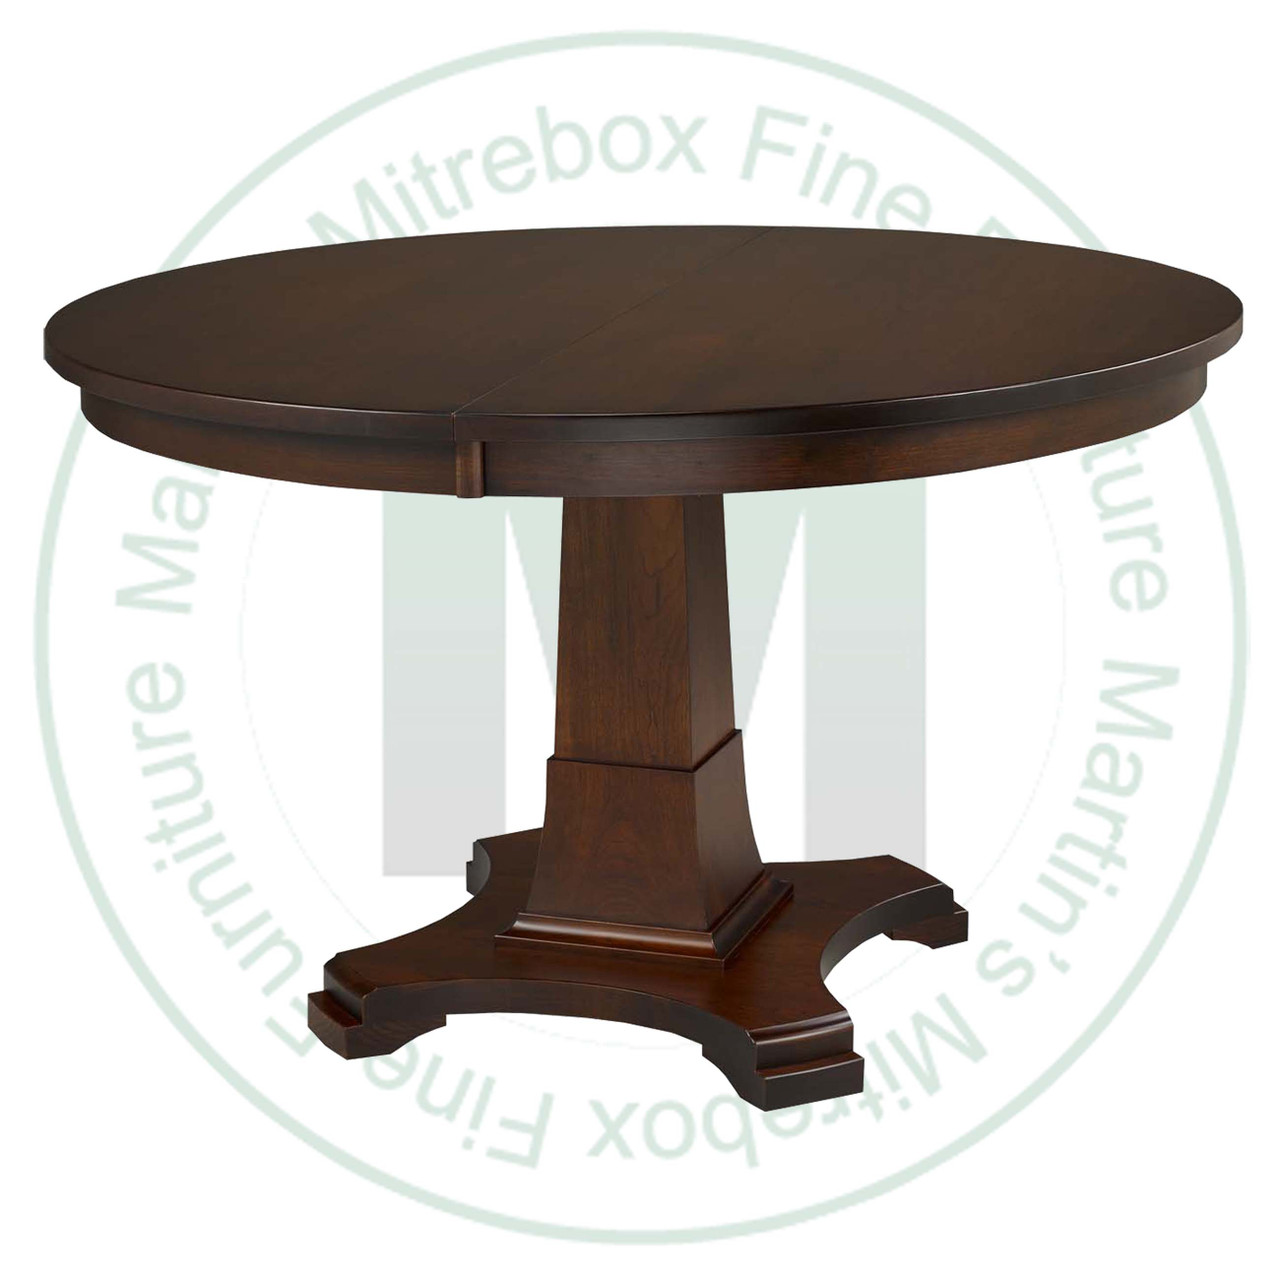 Maple Abbey Single Pedestal Table 36''D x 42''W x 30''H With 2 - 12'' Leaves. Table Has 1.25'' Thick Top